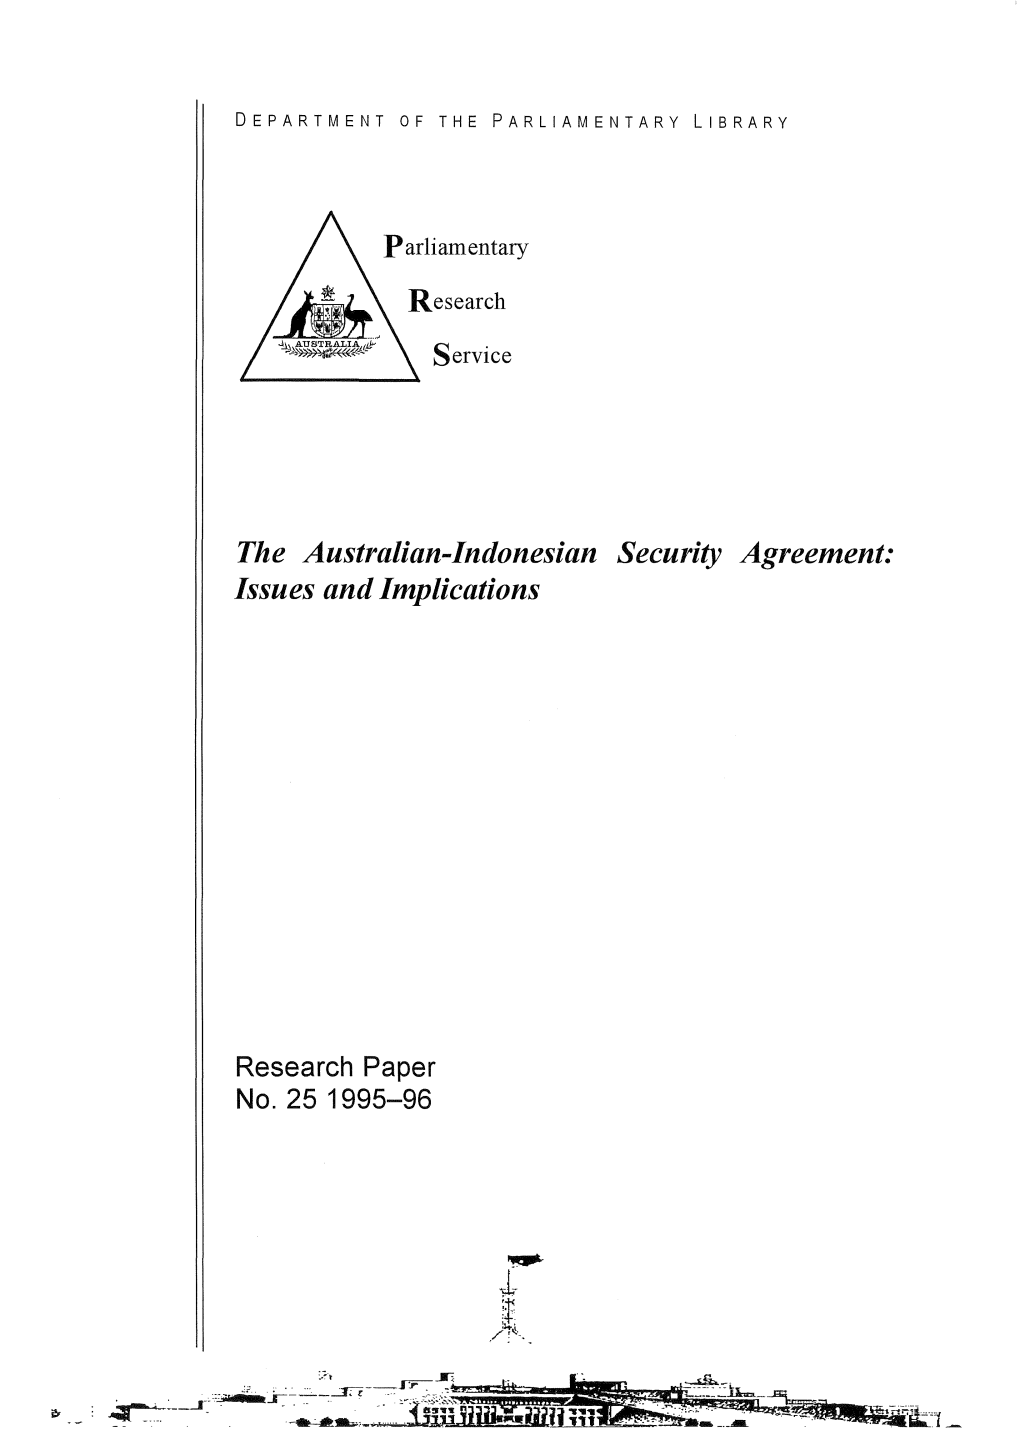 The Australian-Indonesian Security Agreement: Issues and Implications